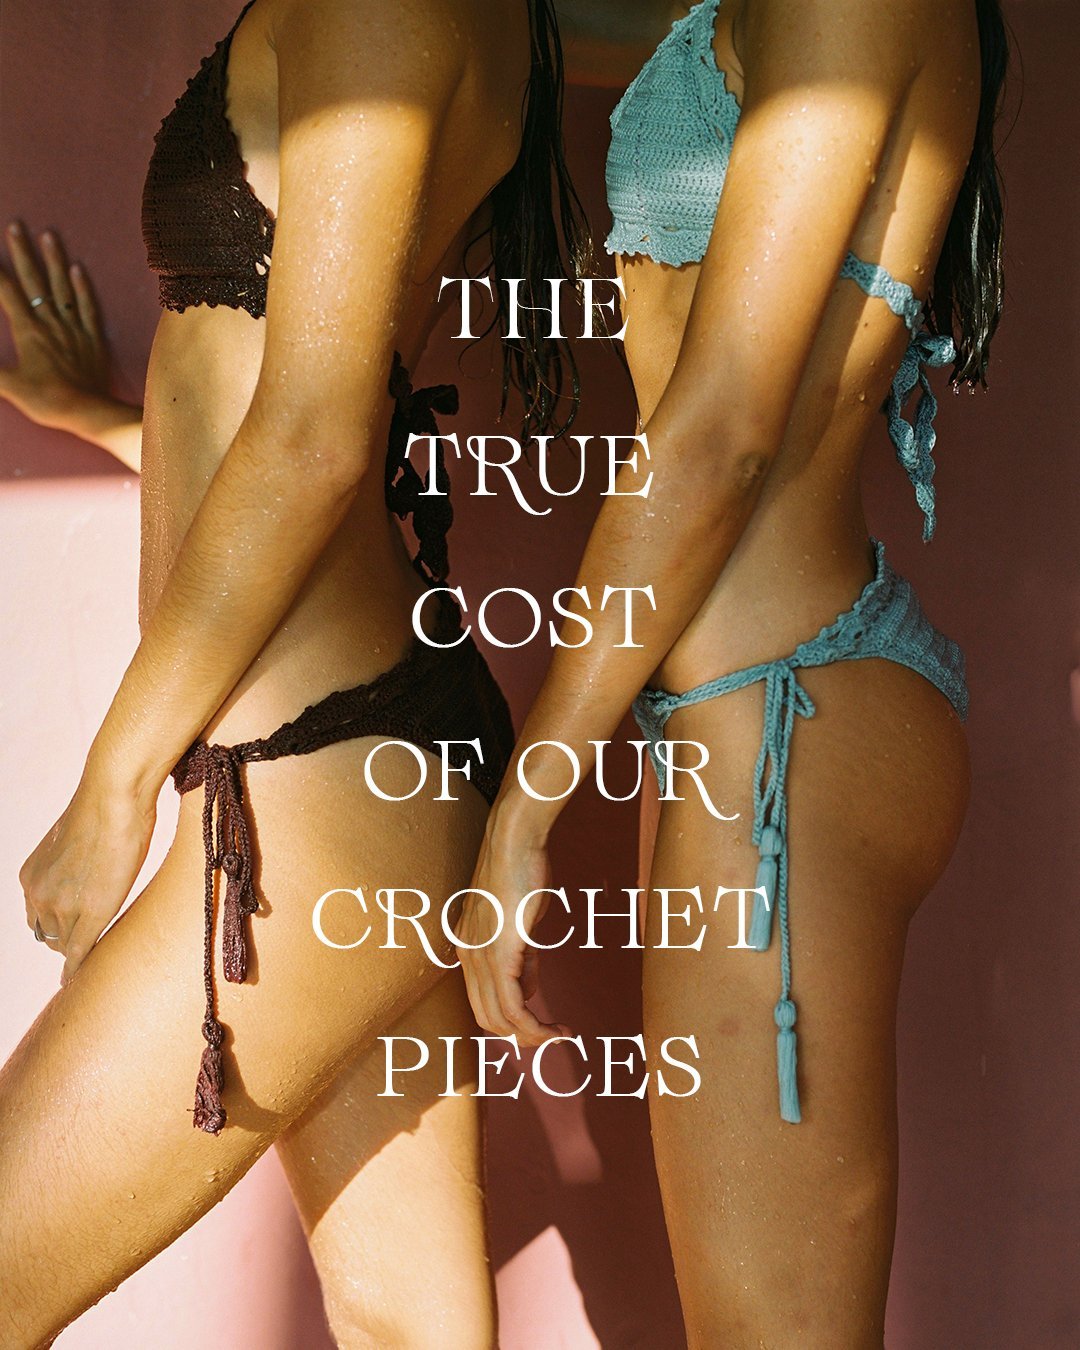 The true cost of our crochet pieces